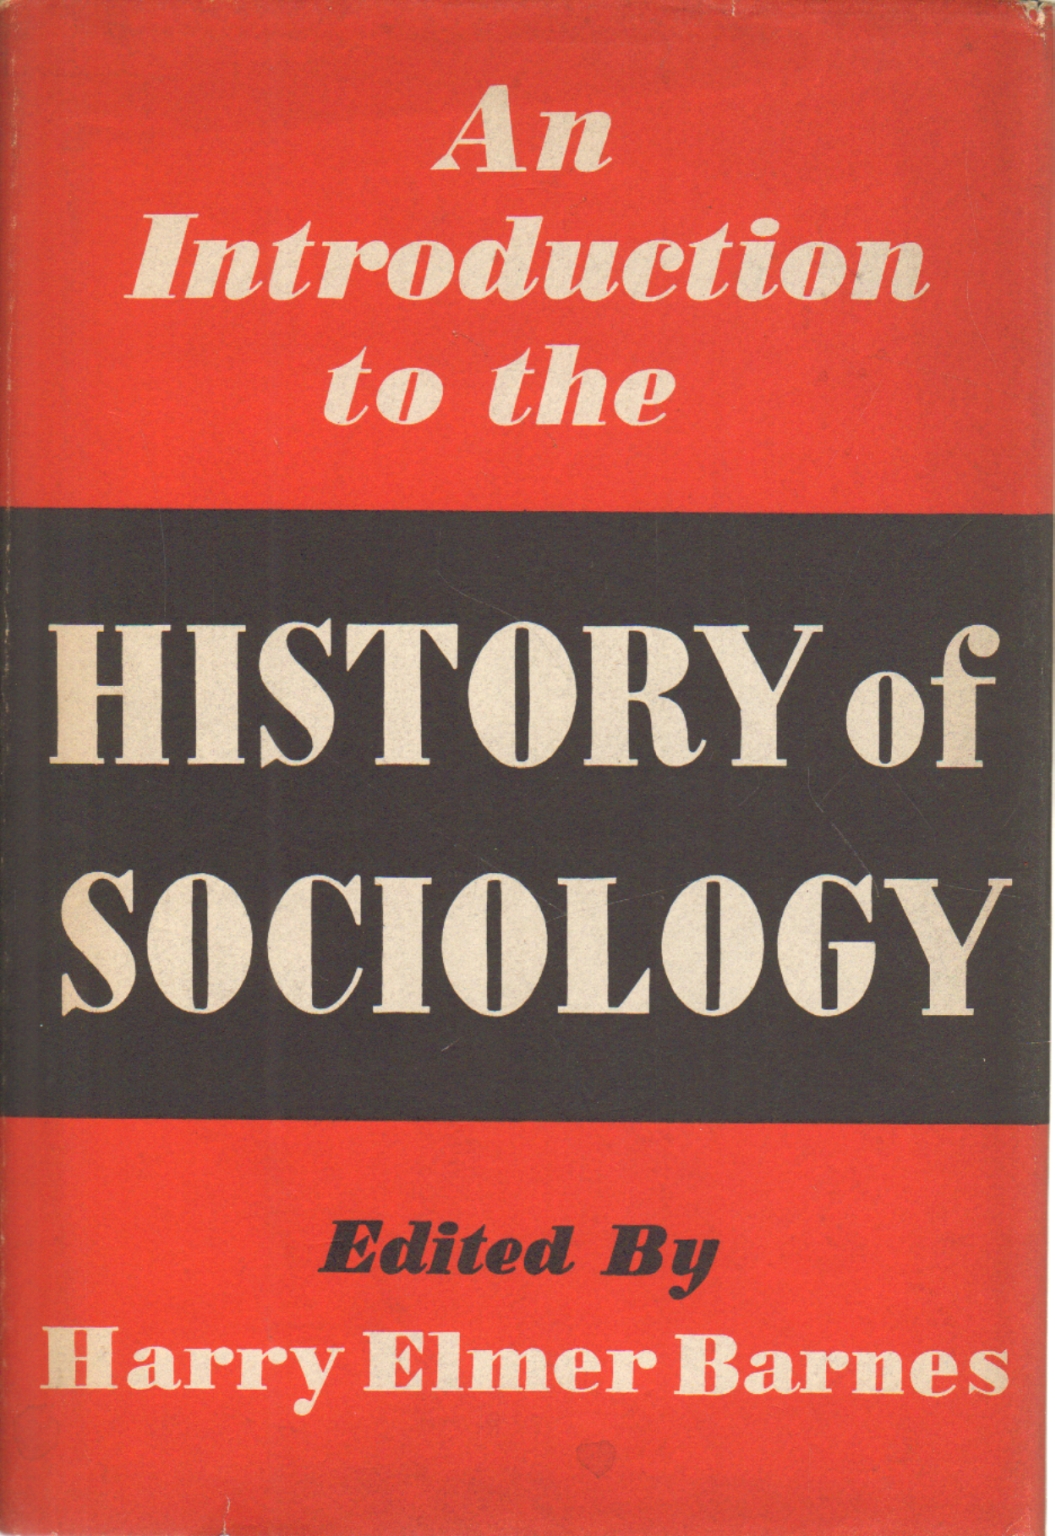 An introduction to the history of sociology, Harry Elmer Barnes